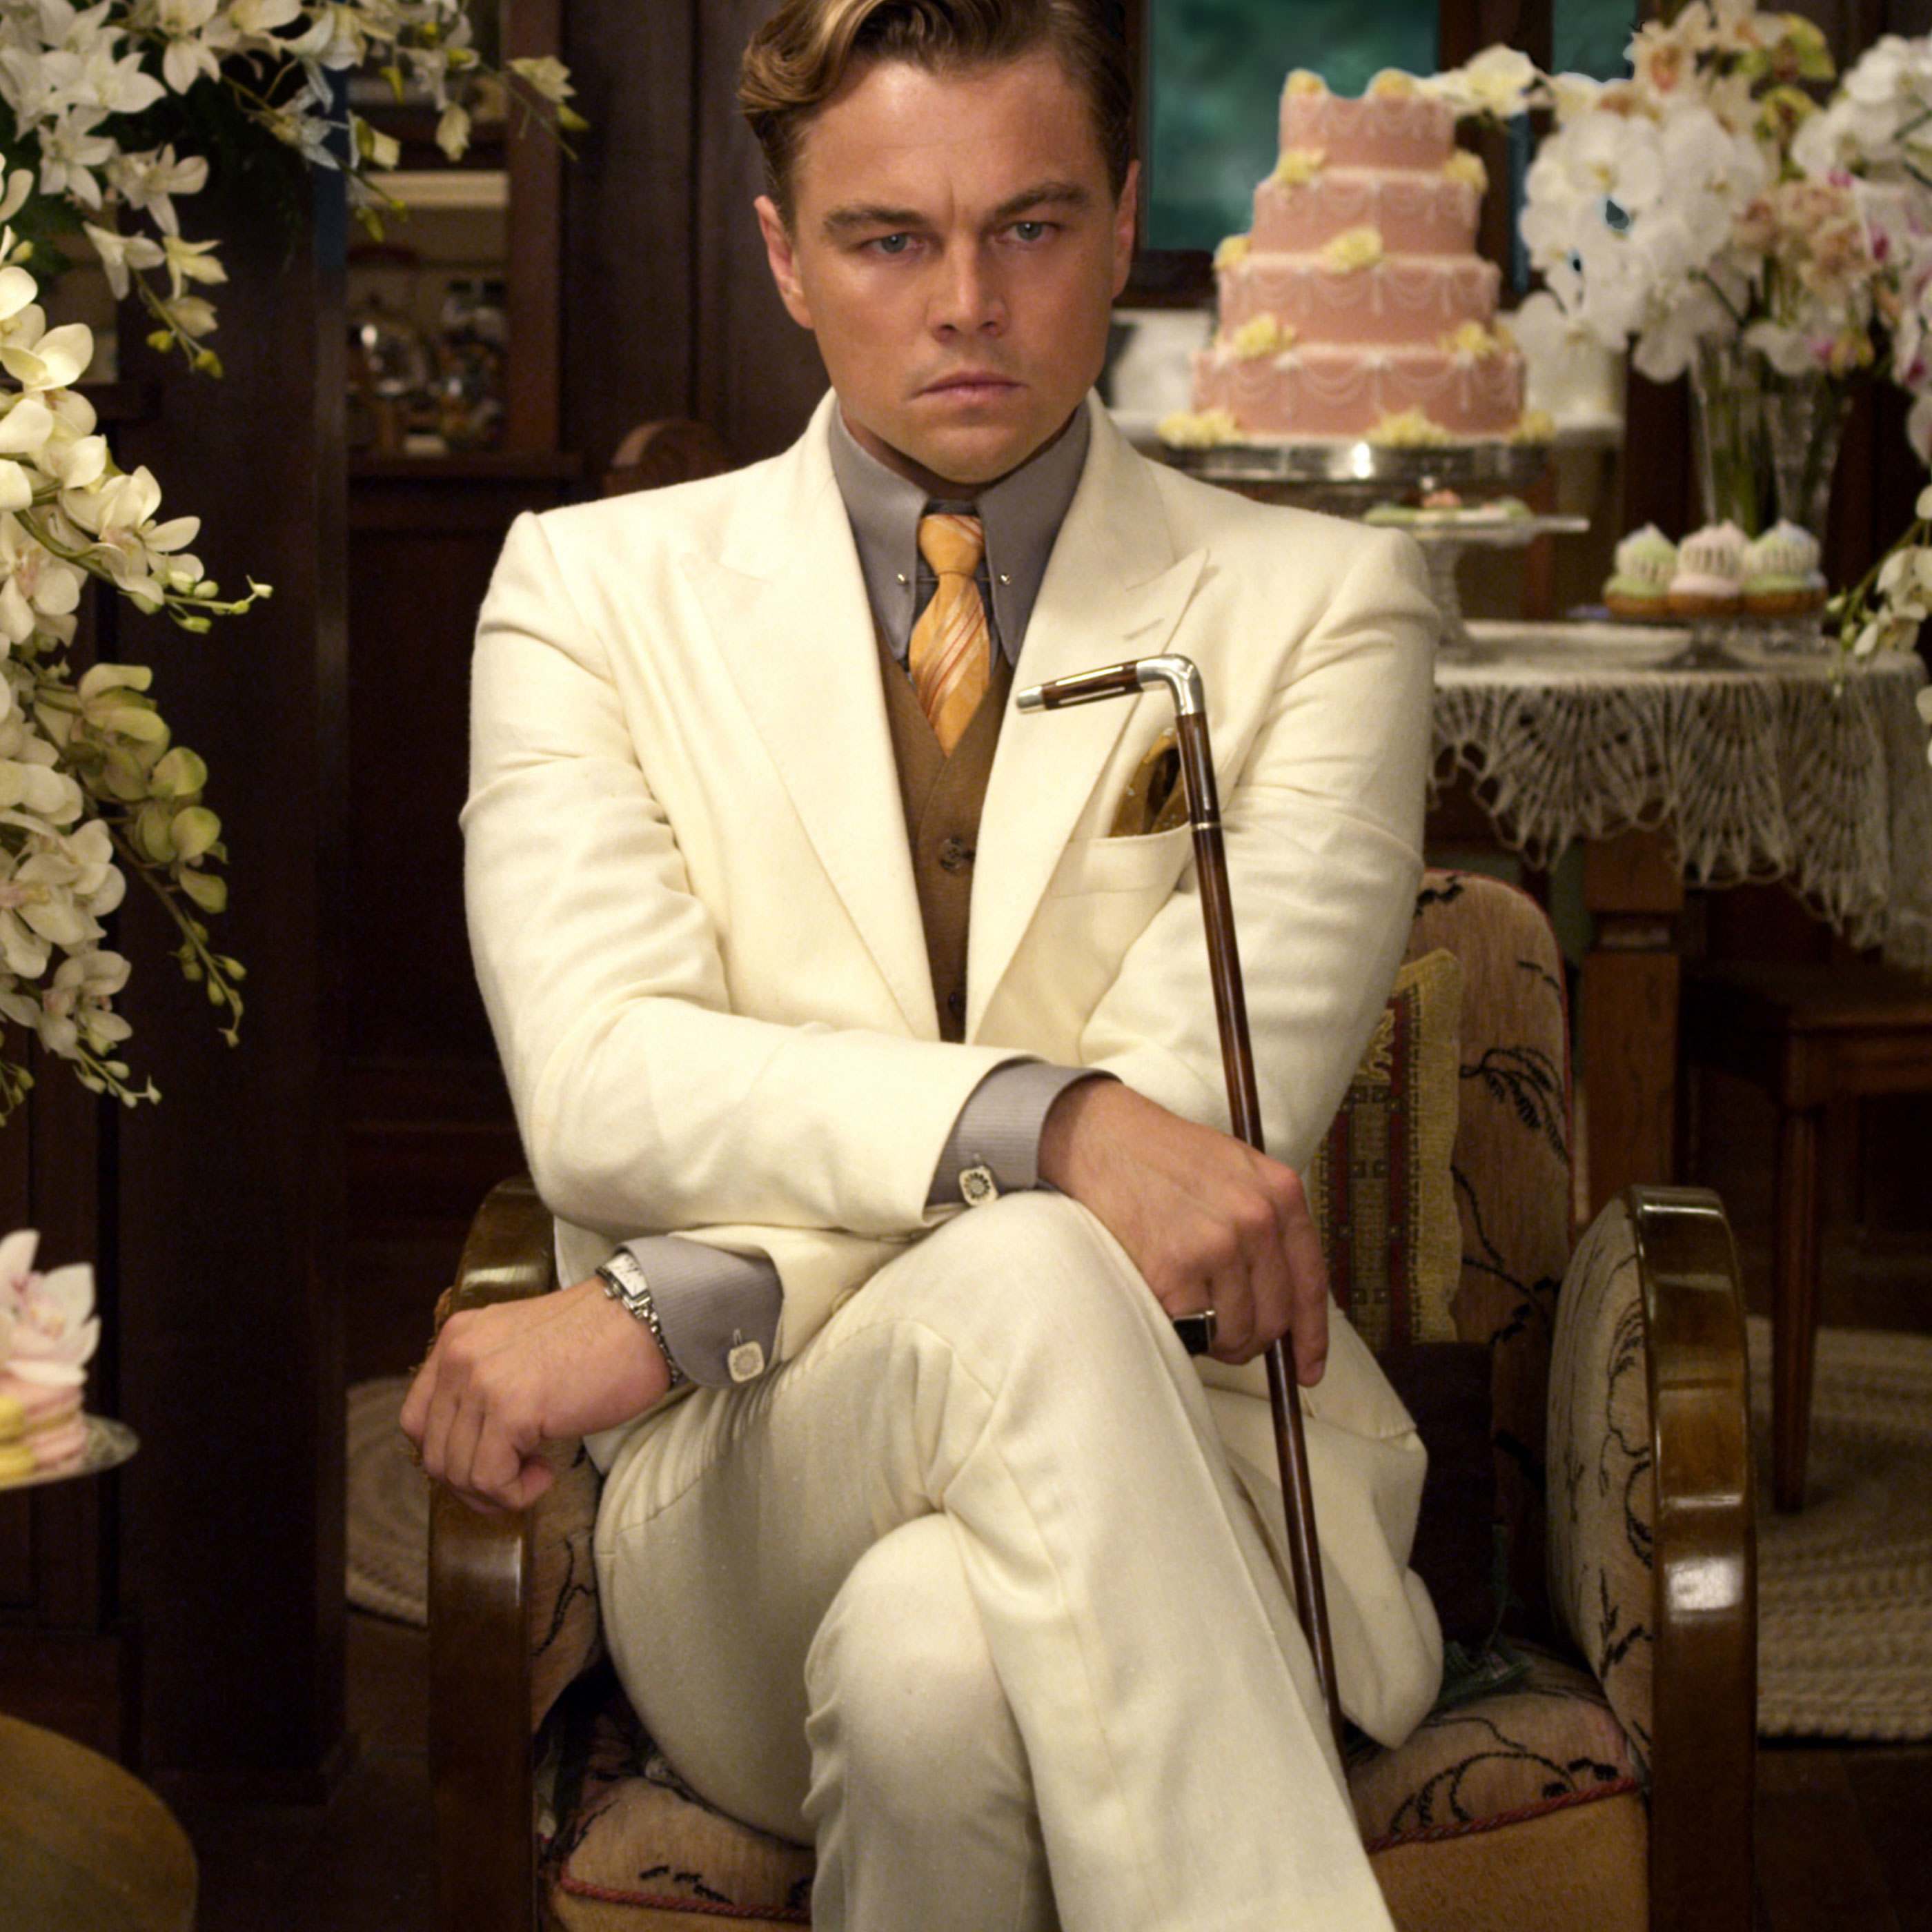 An image of Great Gatsby, played by Leonardo Di Caprio, from the 2013 film adaptation, sat in a white suit with a grey shirt and yellow tie, holding a cane